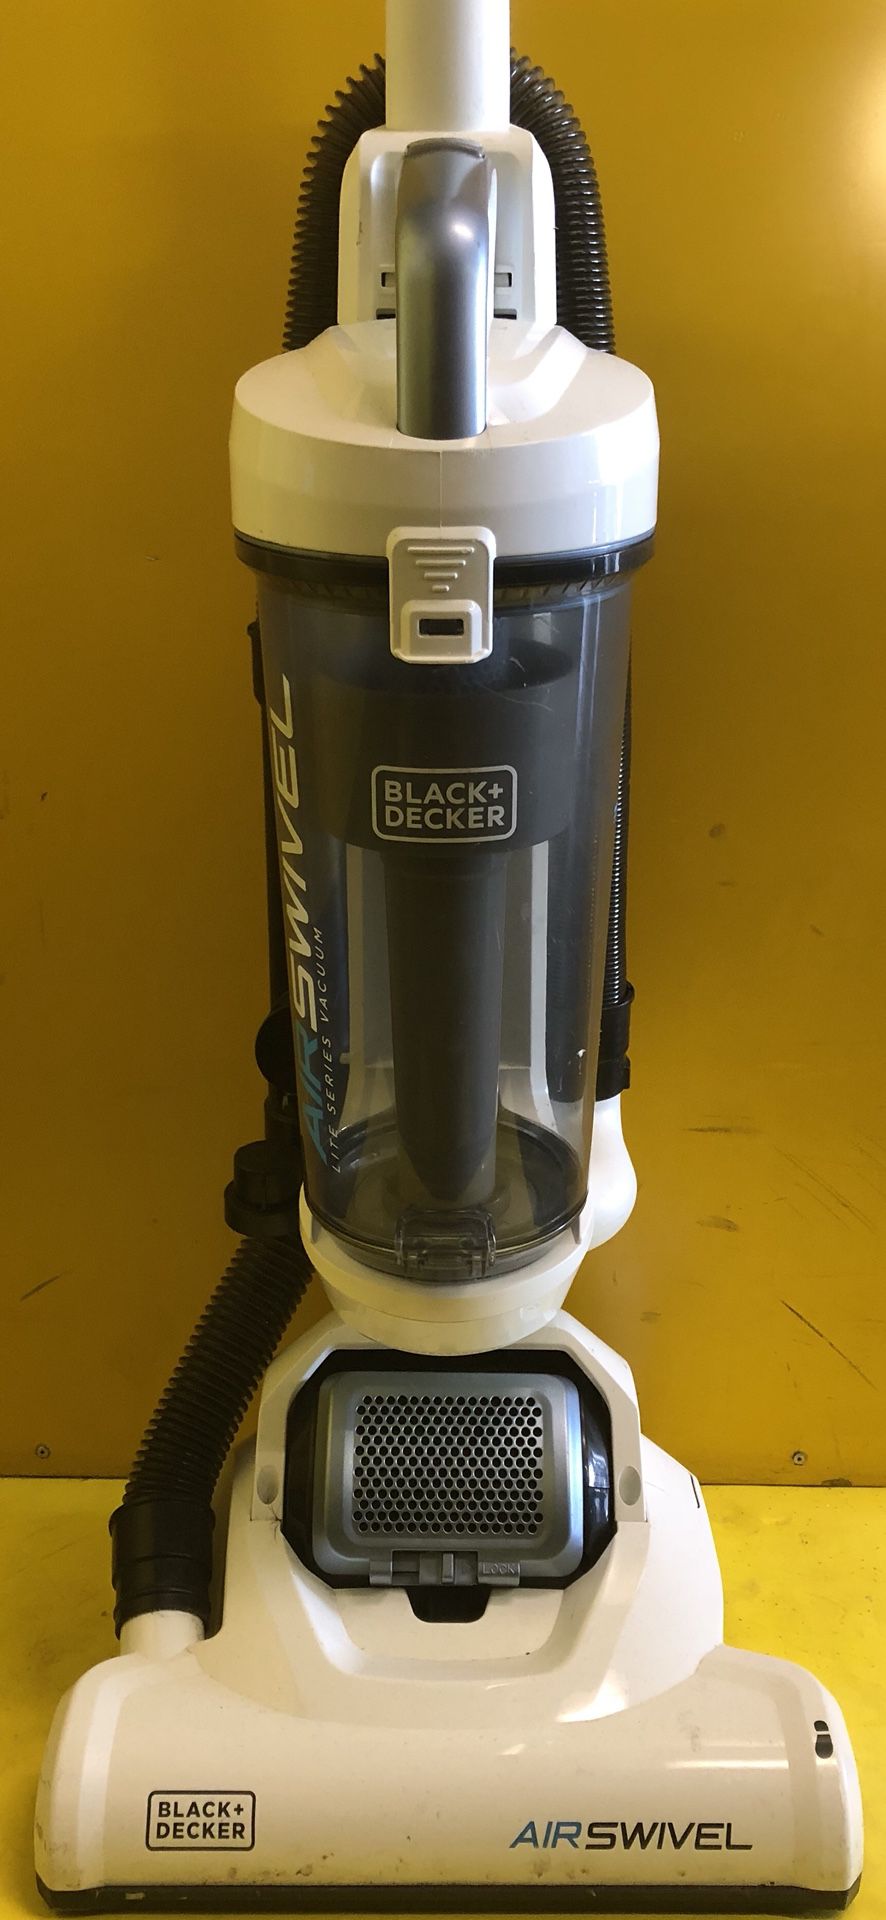 Black and Decker BDASL106 AIRSWIVEL Ultra light weight Upright Vacuum  Cleaner Lite Blue - GOOD CONDITION for Sale in Winter Springs, FL - OfferUp